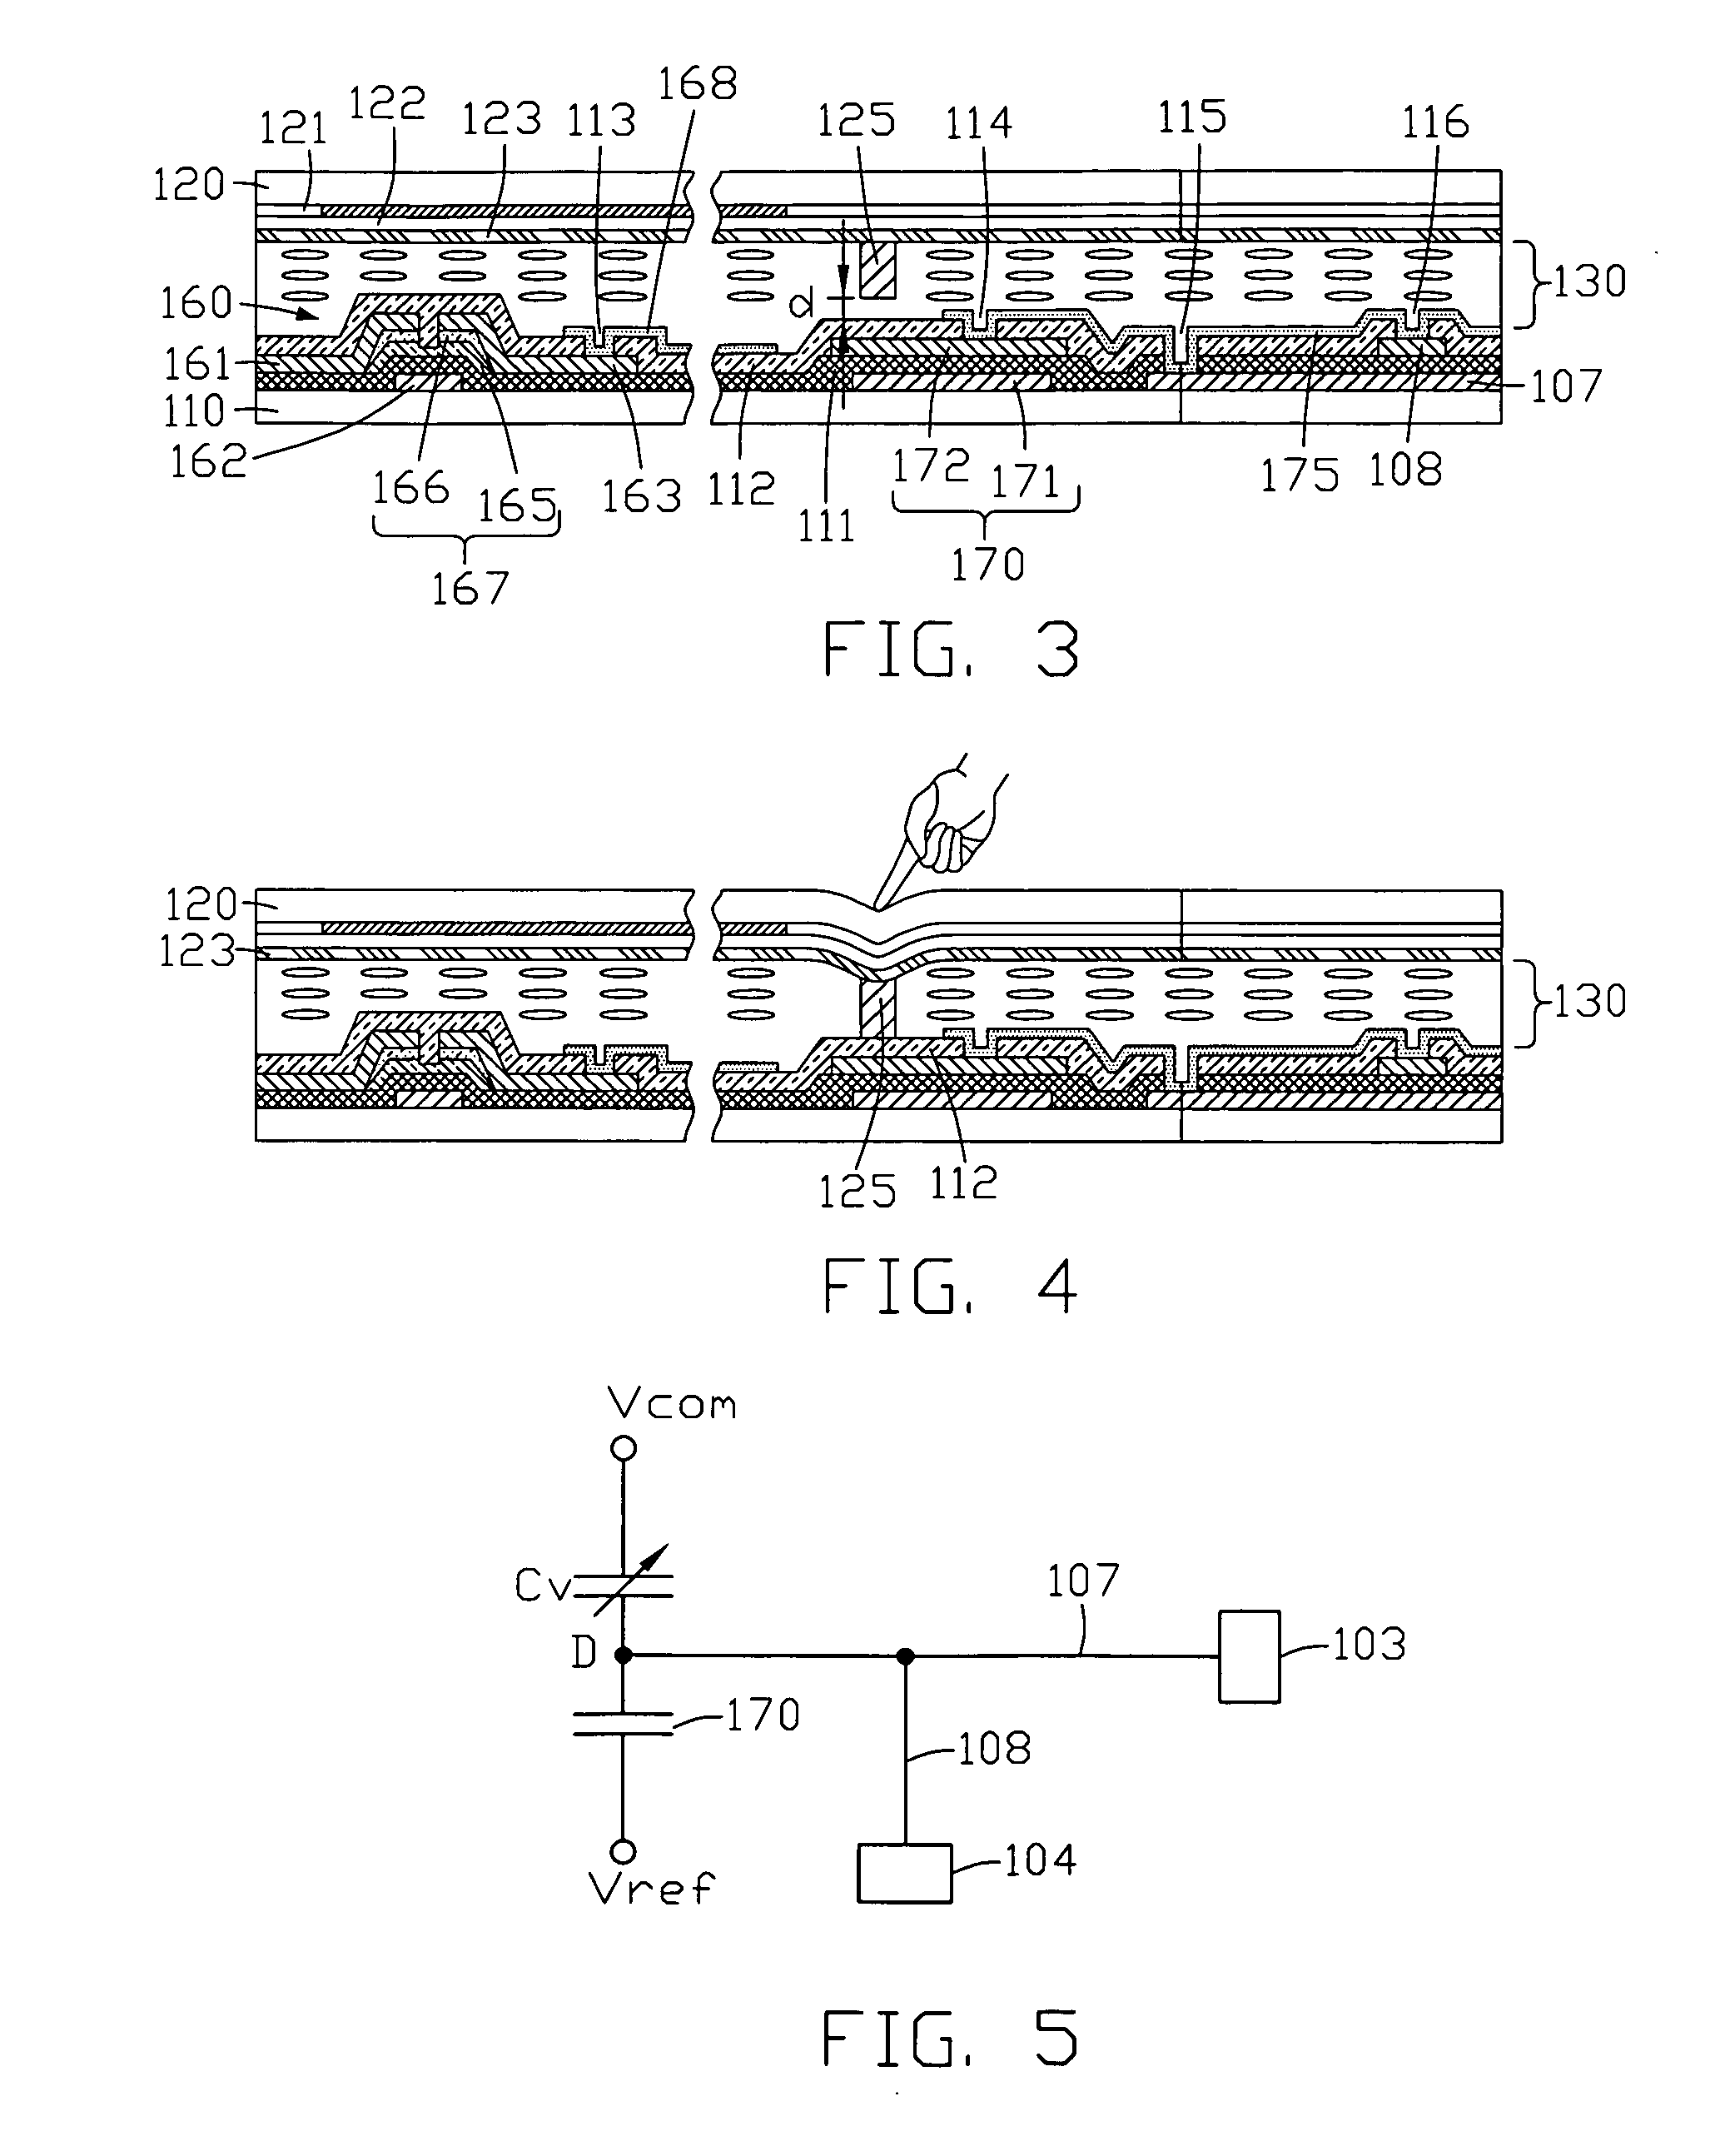 Touch-sensitive liquid crystal display device with built-in touch mechanism